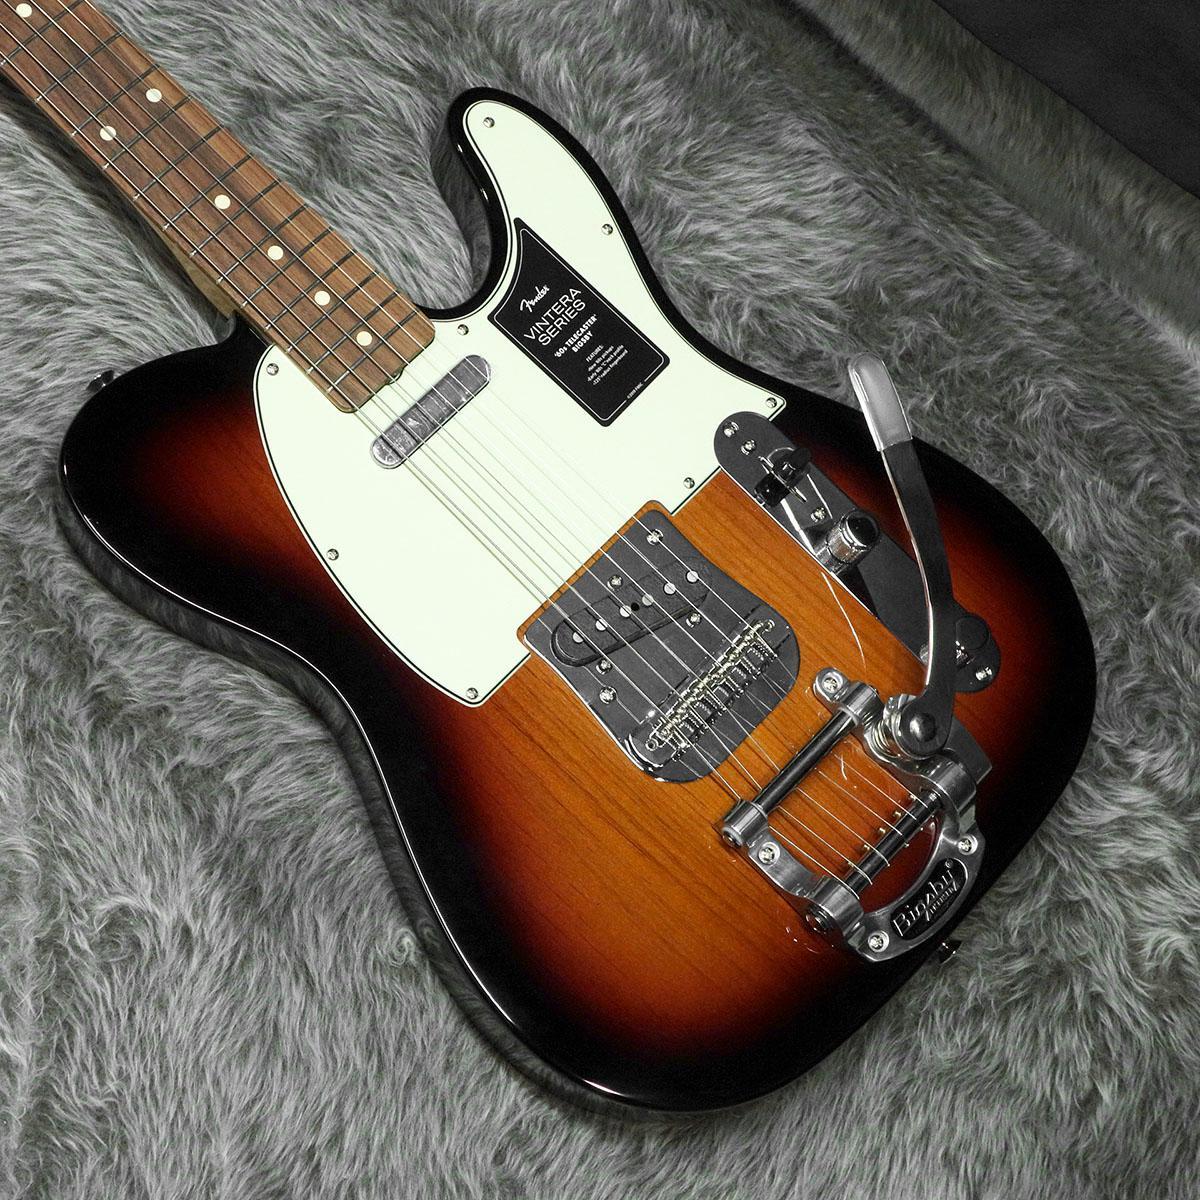 Telecaster Bigsby